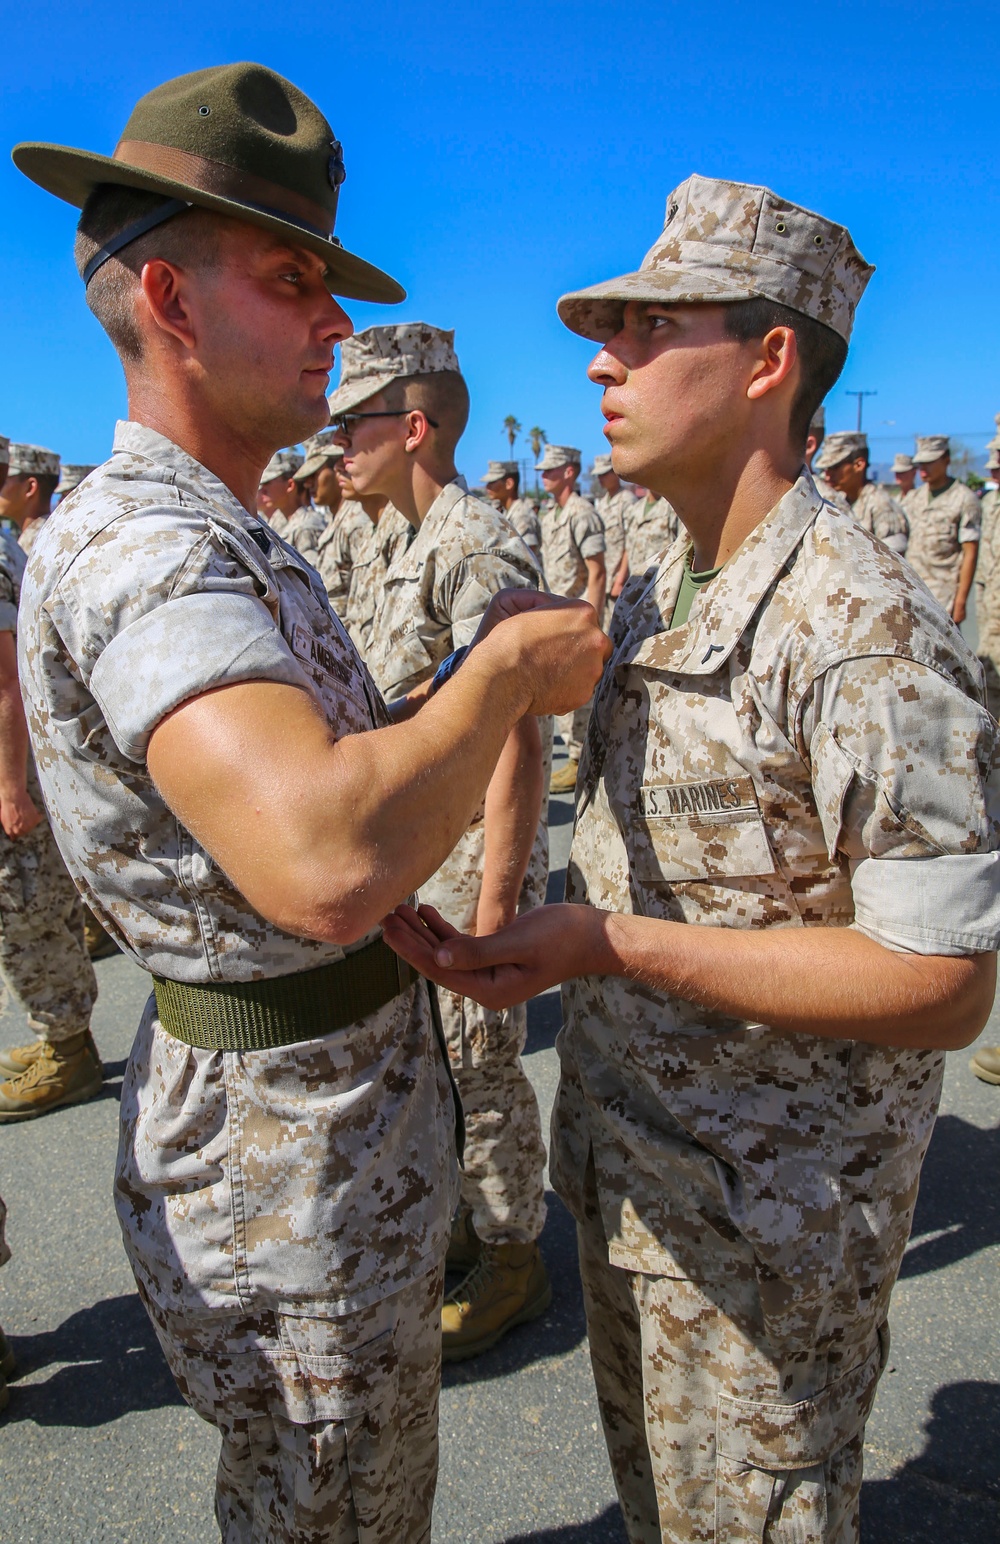 Goals are set for new Marine